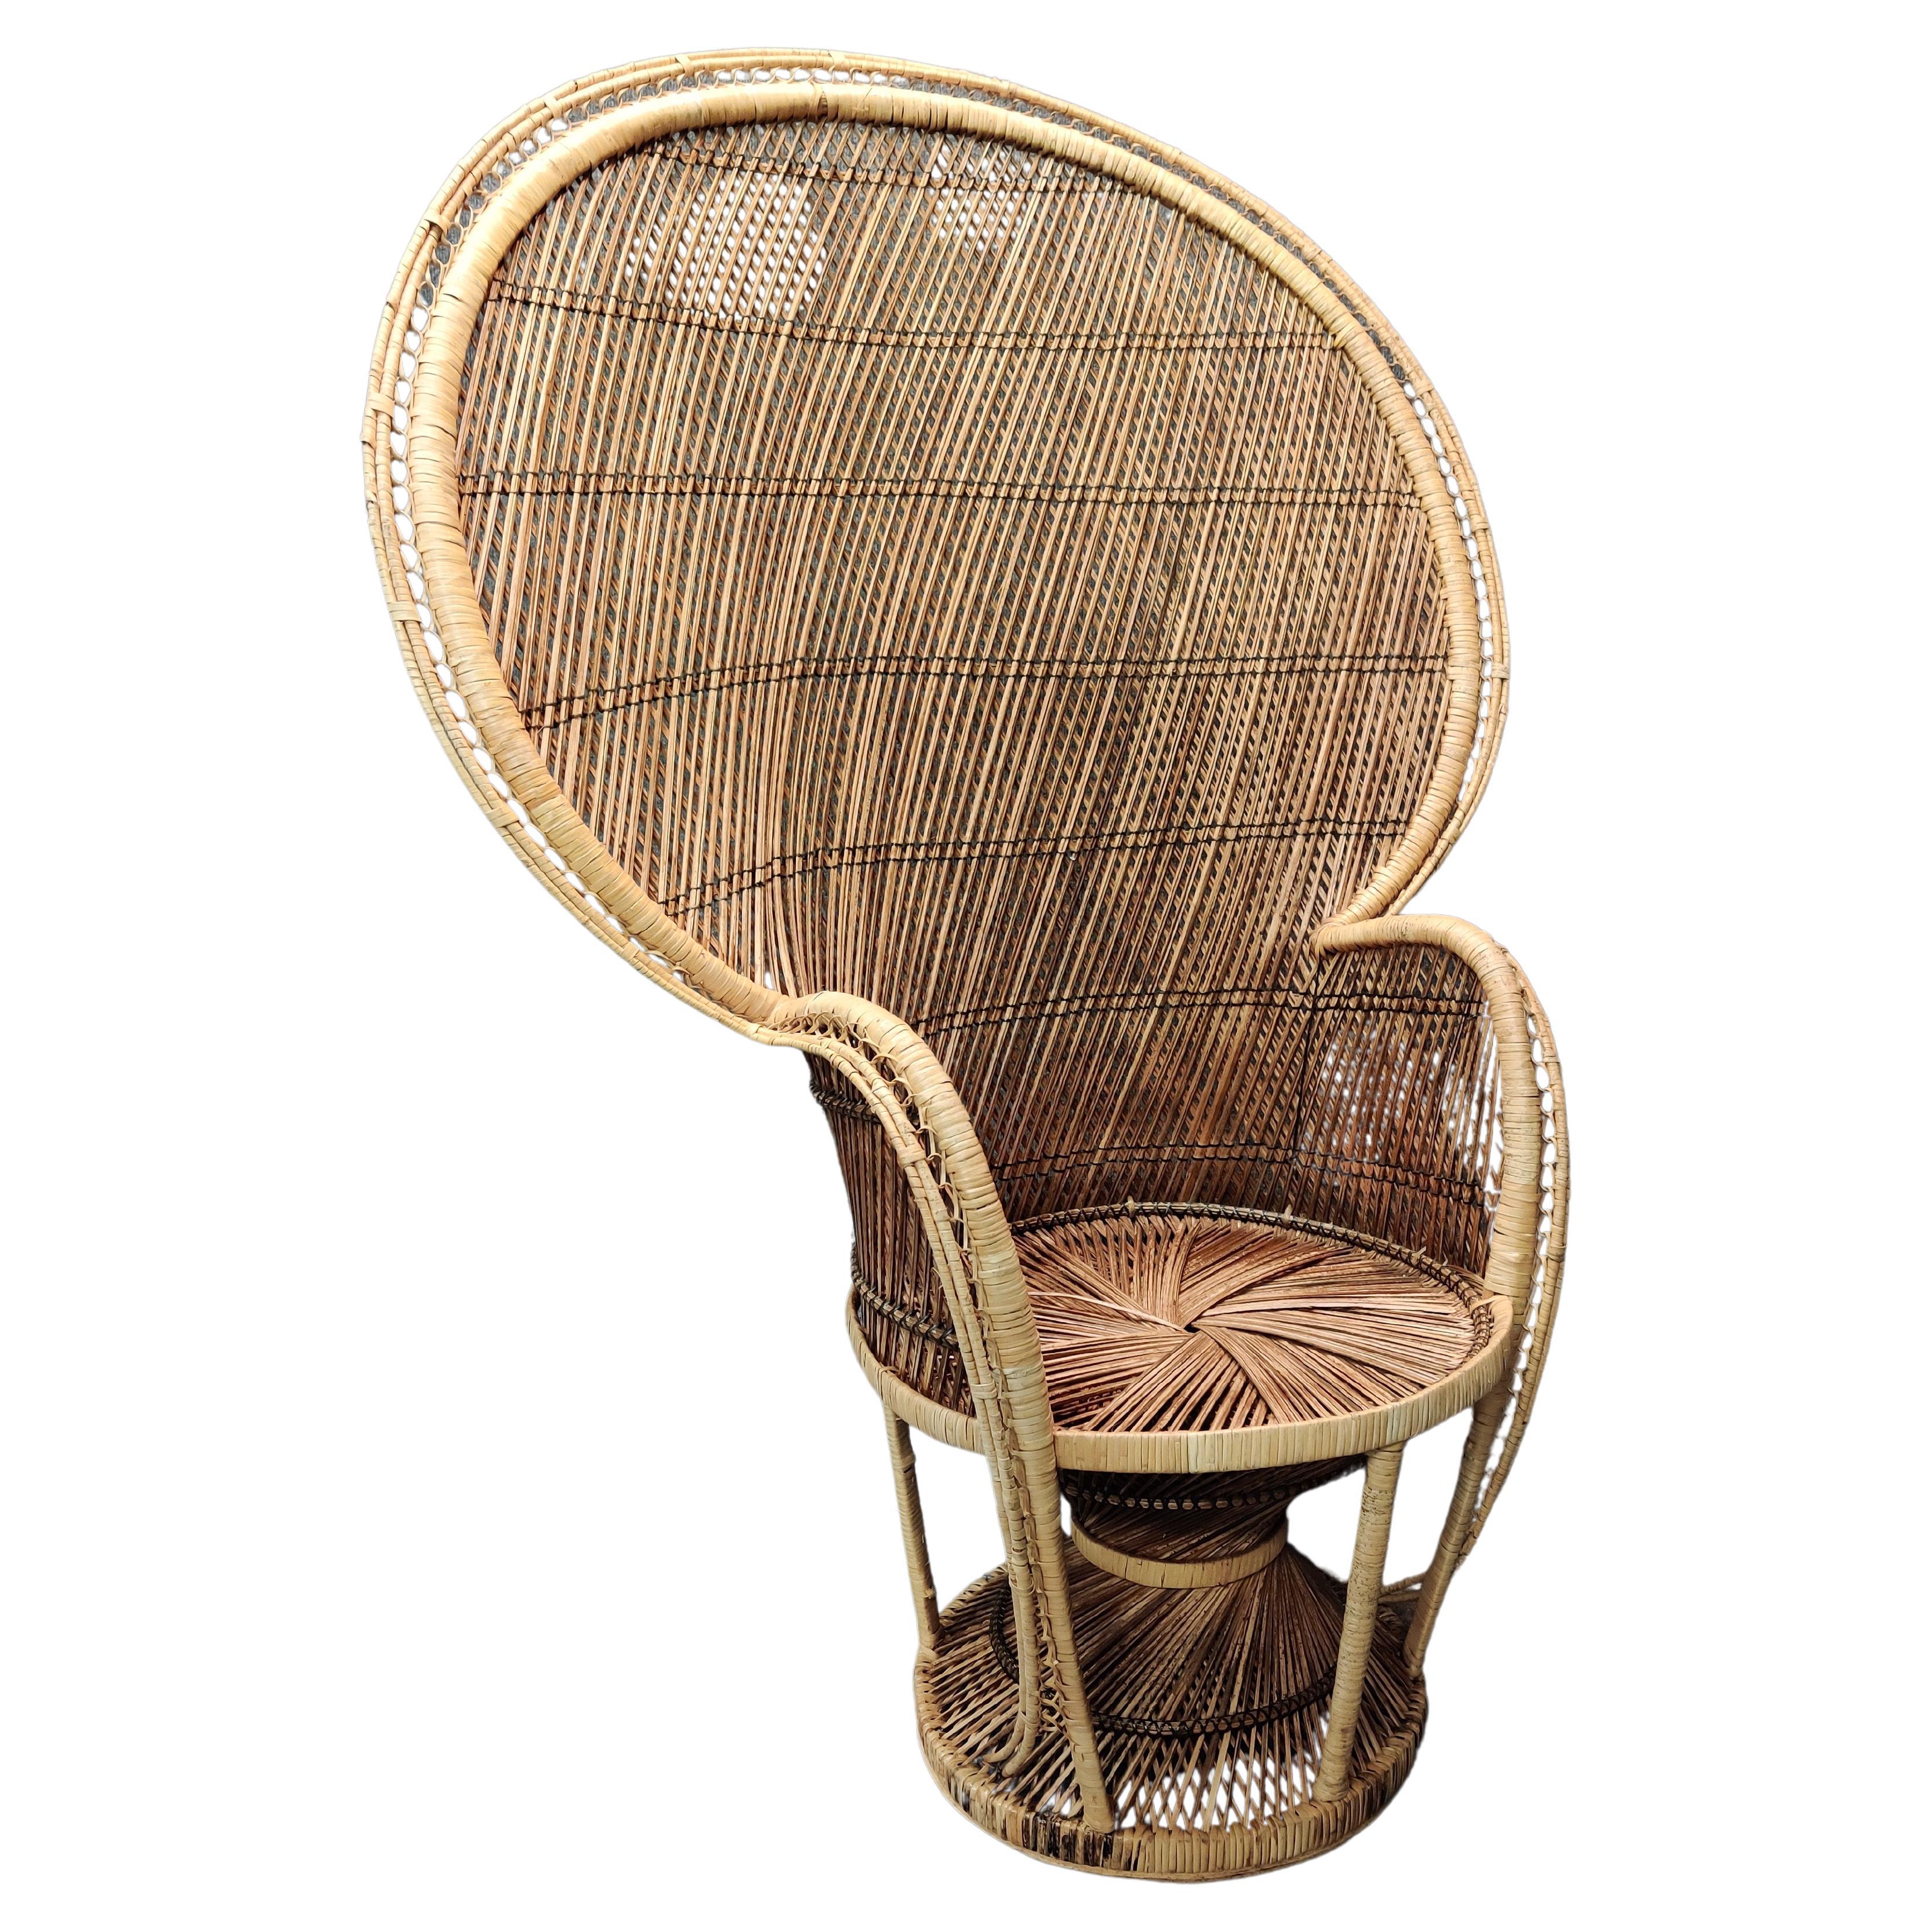 Vintage Boho Chic Wicker, Rattan, Bamboo, Peacock Chair For Sale at 1stDibs